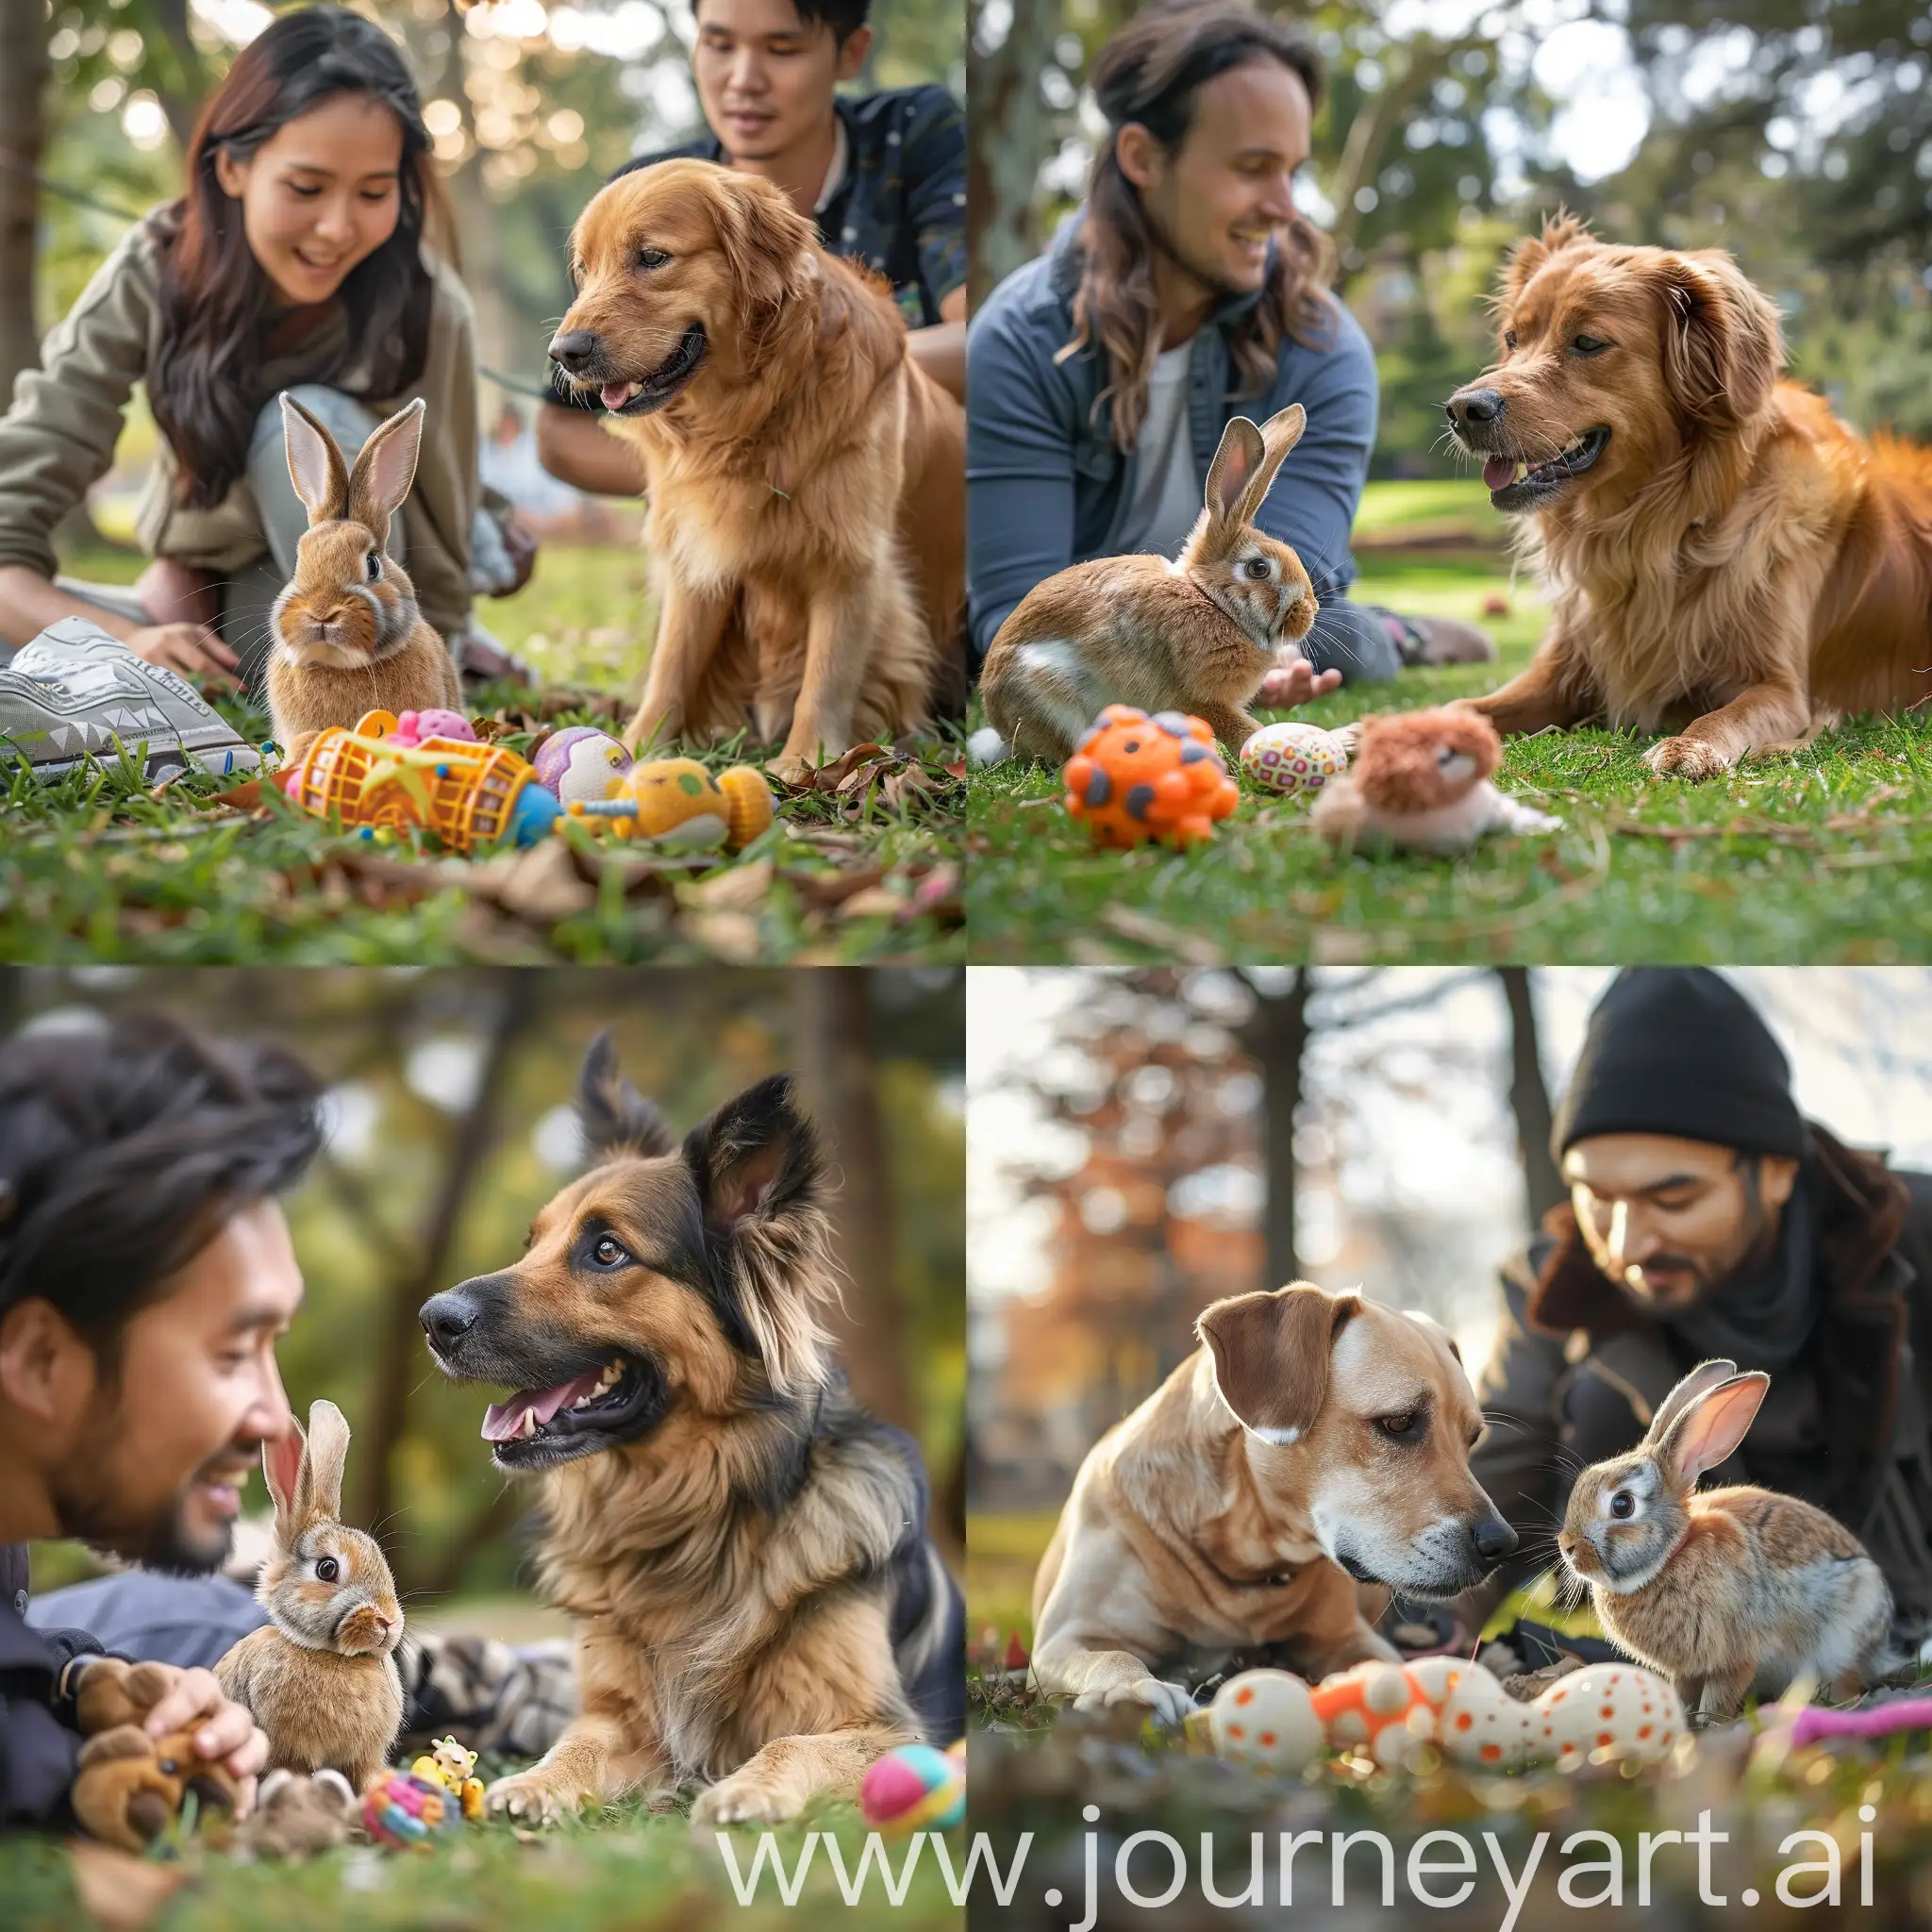 Playful-Dog-and-Rabbit-Enjoying-FunFilled-Park-Day-with-Loving-Owner